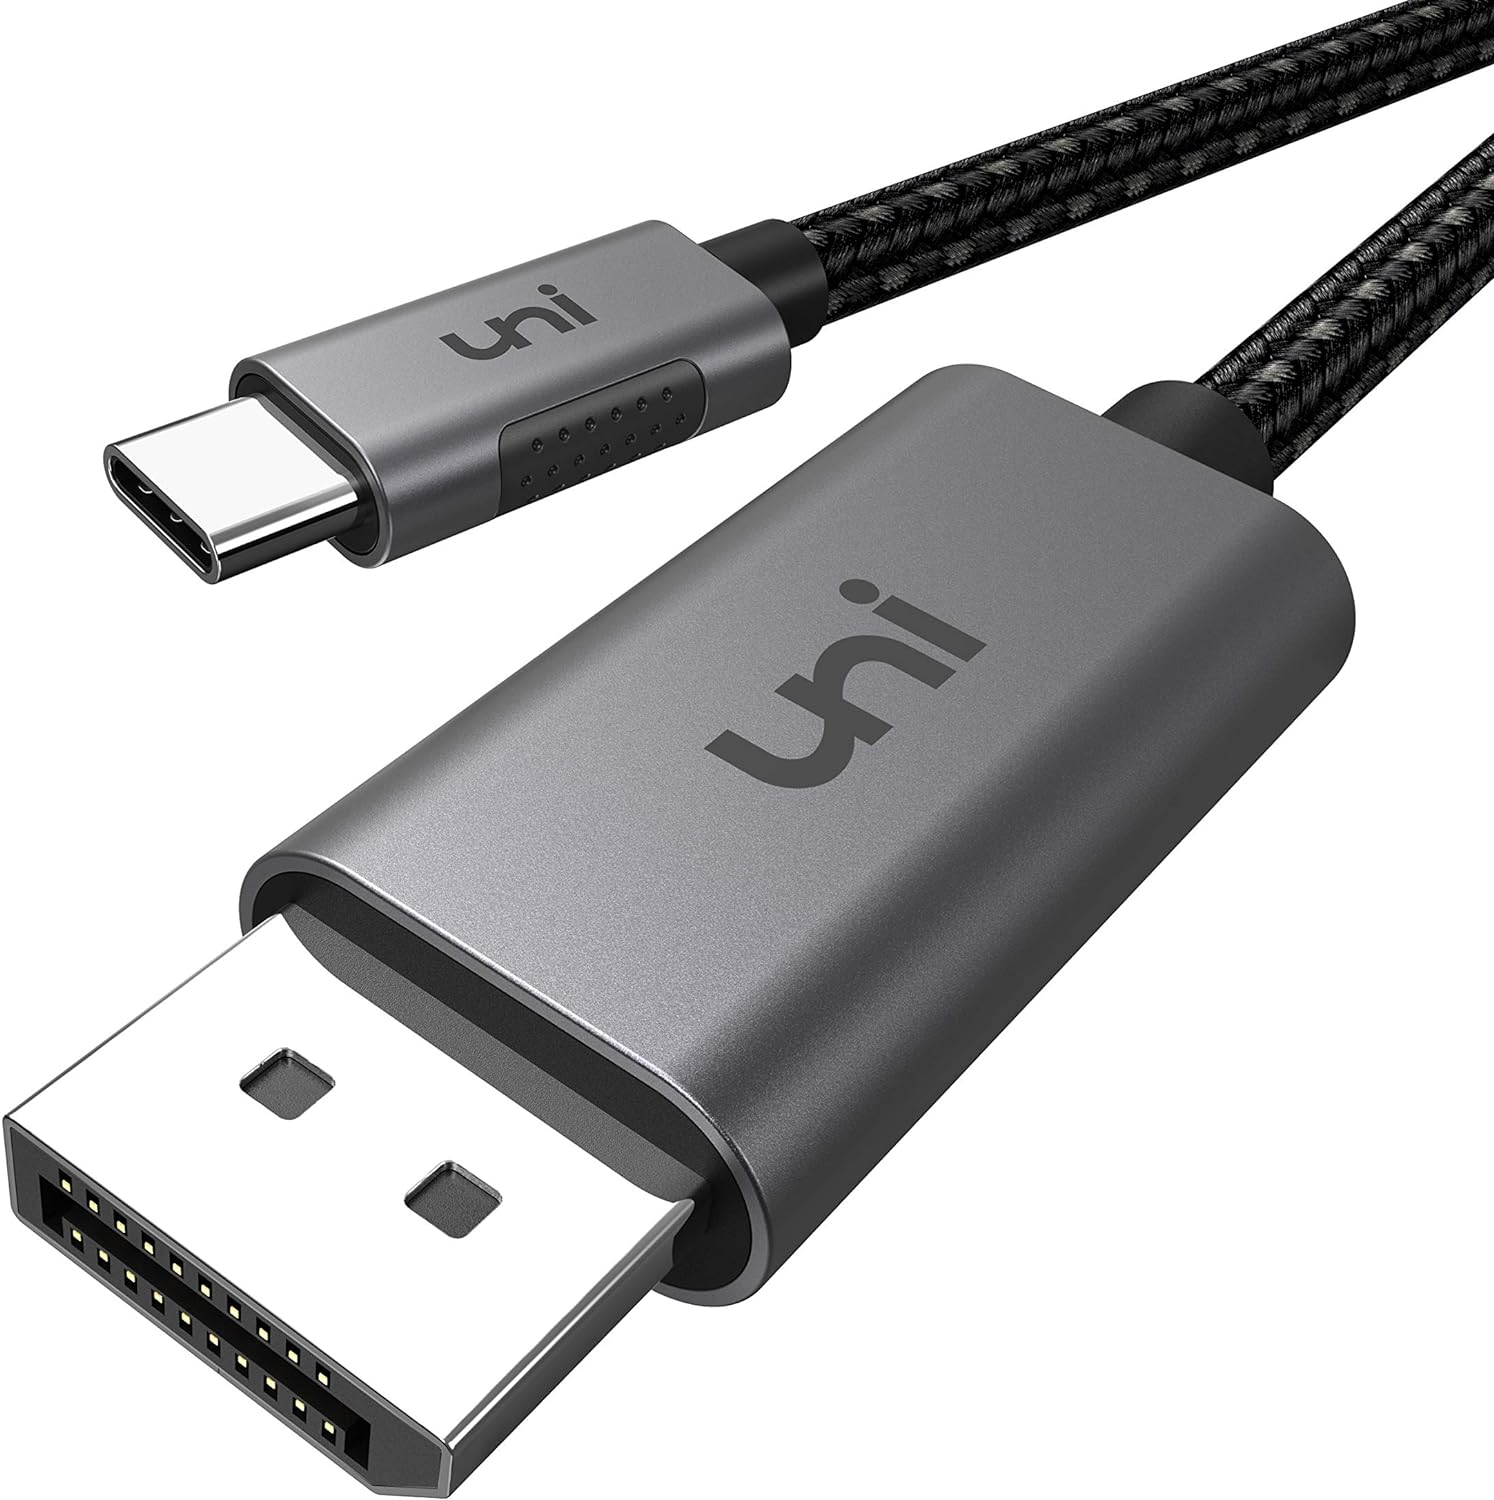 USB-C port with a red X symbol